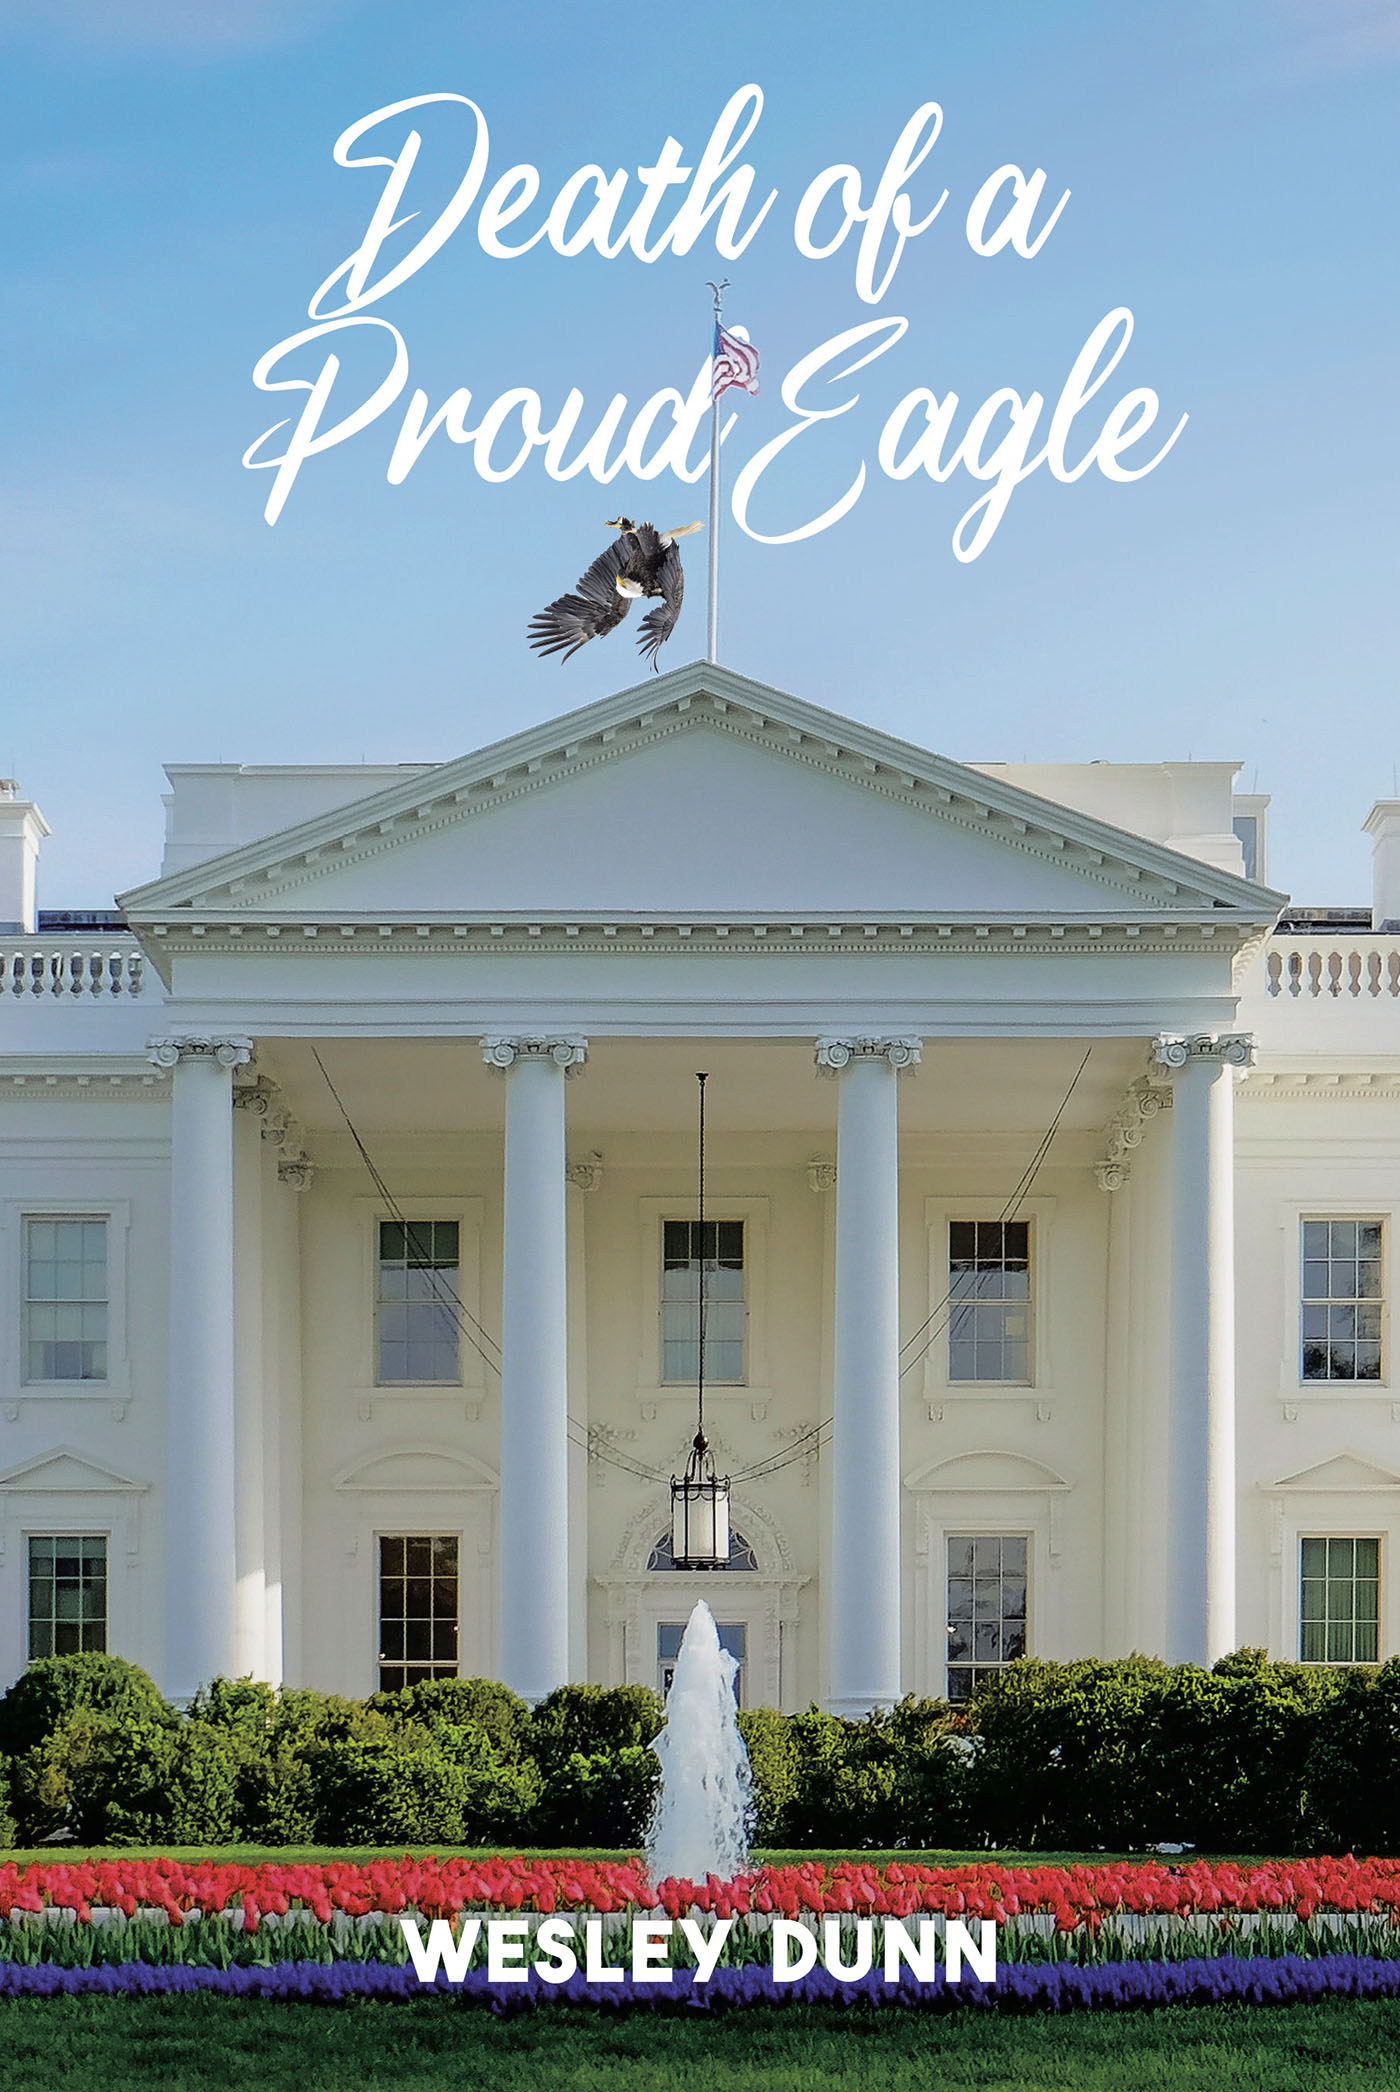 Author Wesley Dunn’s New Book, "Death of a Proud Eagle," is a Riveting Tale of Three Men Willing to Risk Their Lives and Break the Law to Achieve Their Version of Justice